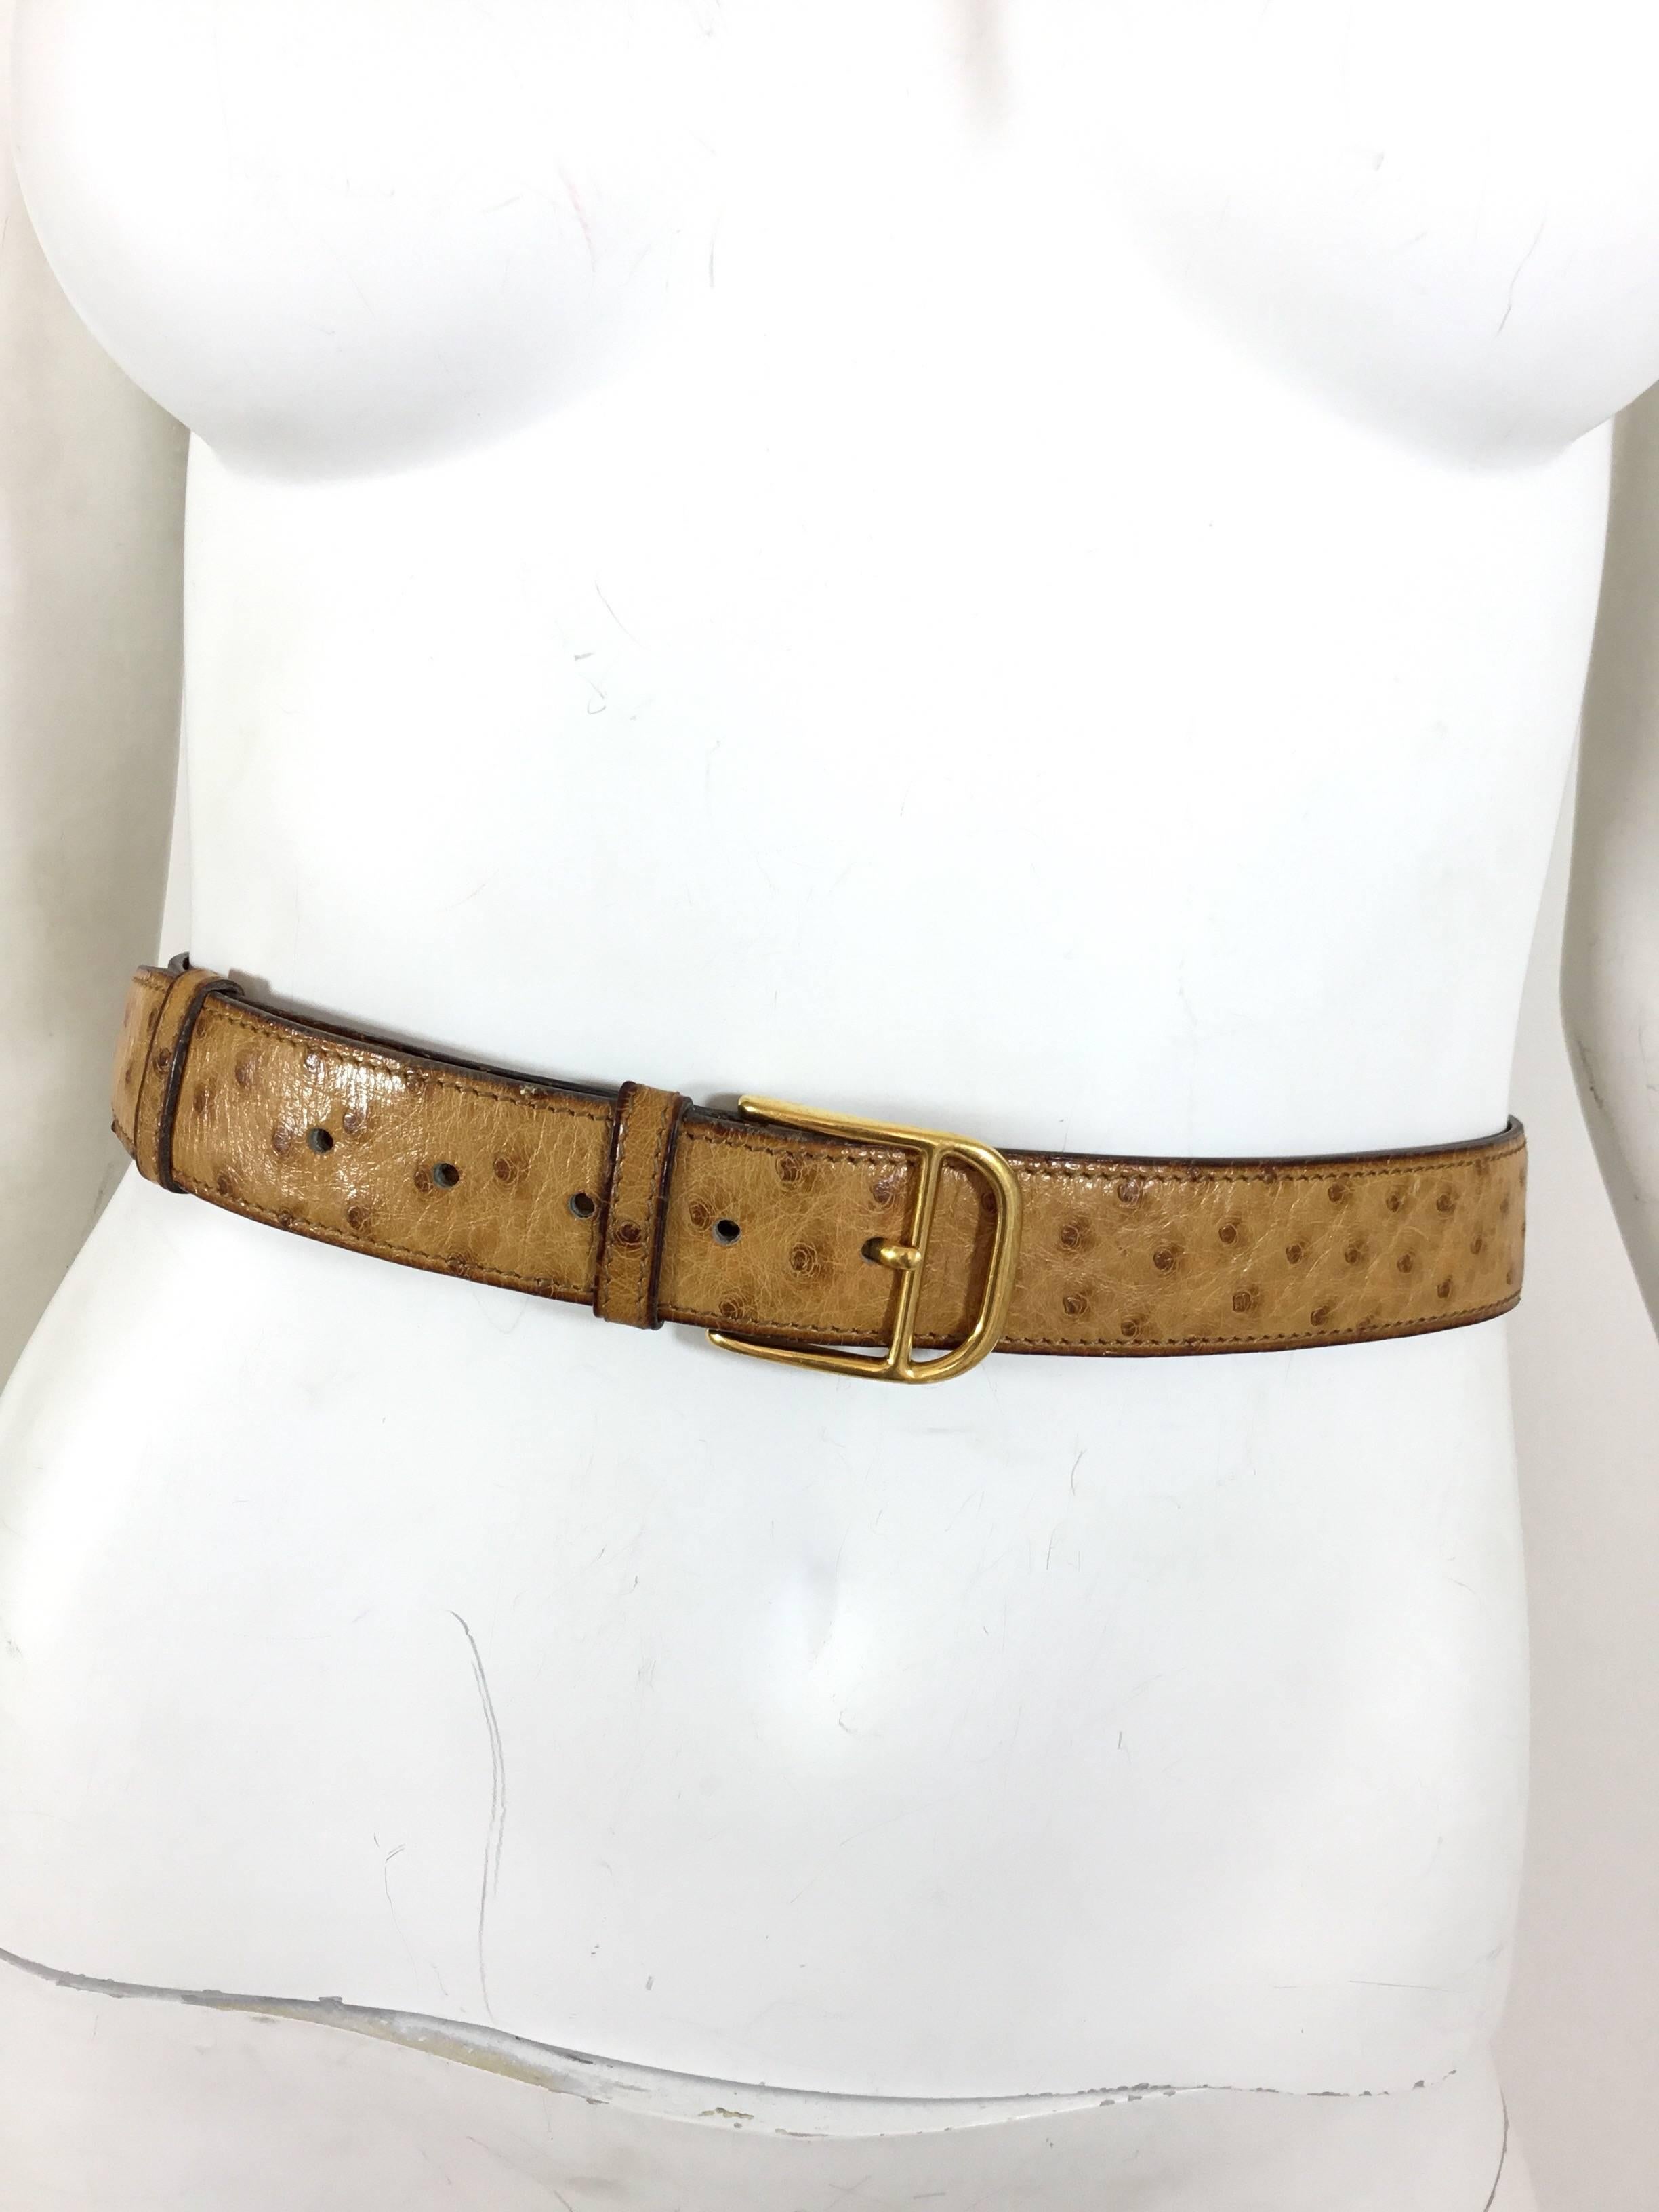 Vintage Hermes ostrich belt featured in Hermes gold color with gold-tone hardware. Belt measures 93 cm long (36.5 in) and 3.5 cm wide (1 in). Belt has leather stampings of an O  in a circle (date stamp for 1985), 90 (size in CM or 35